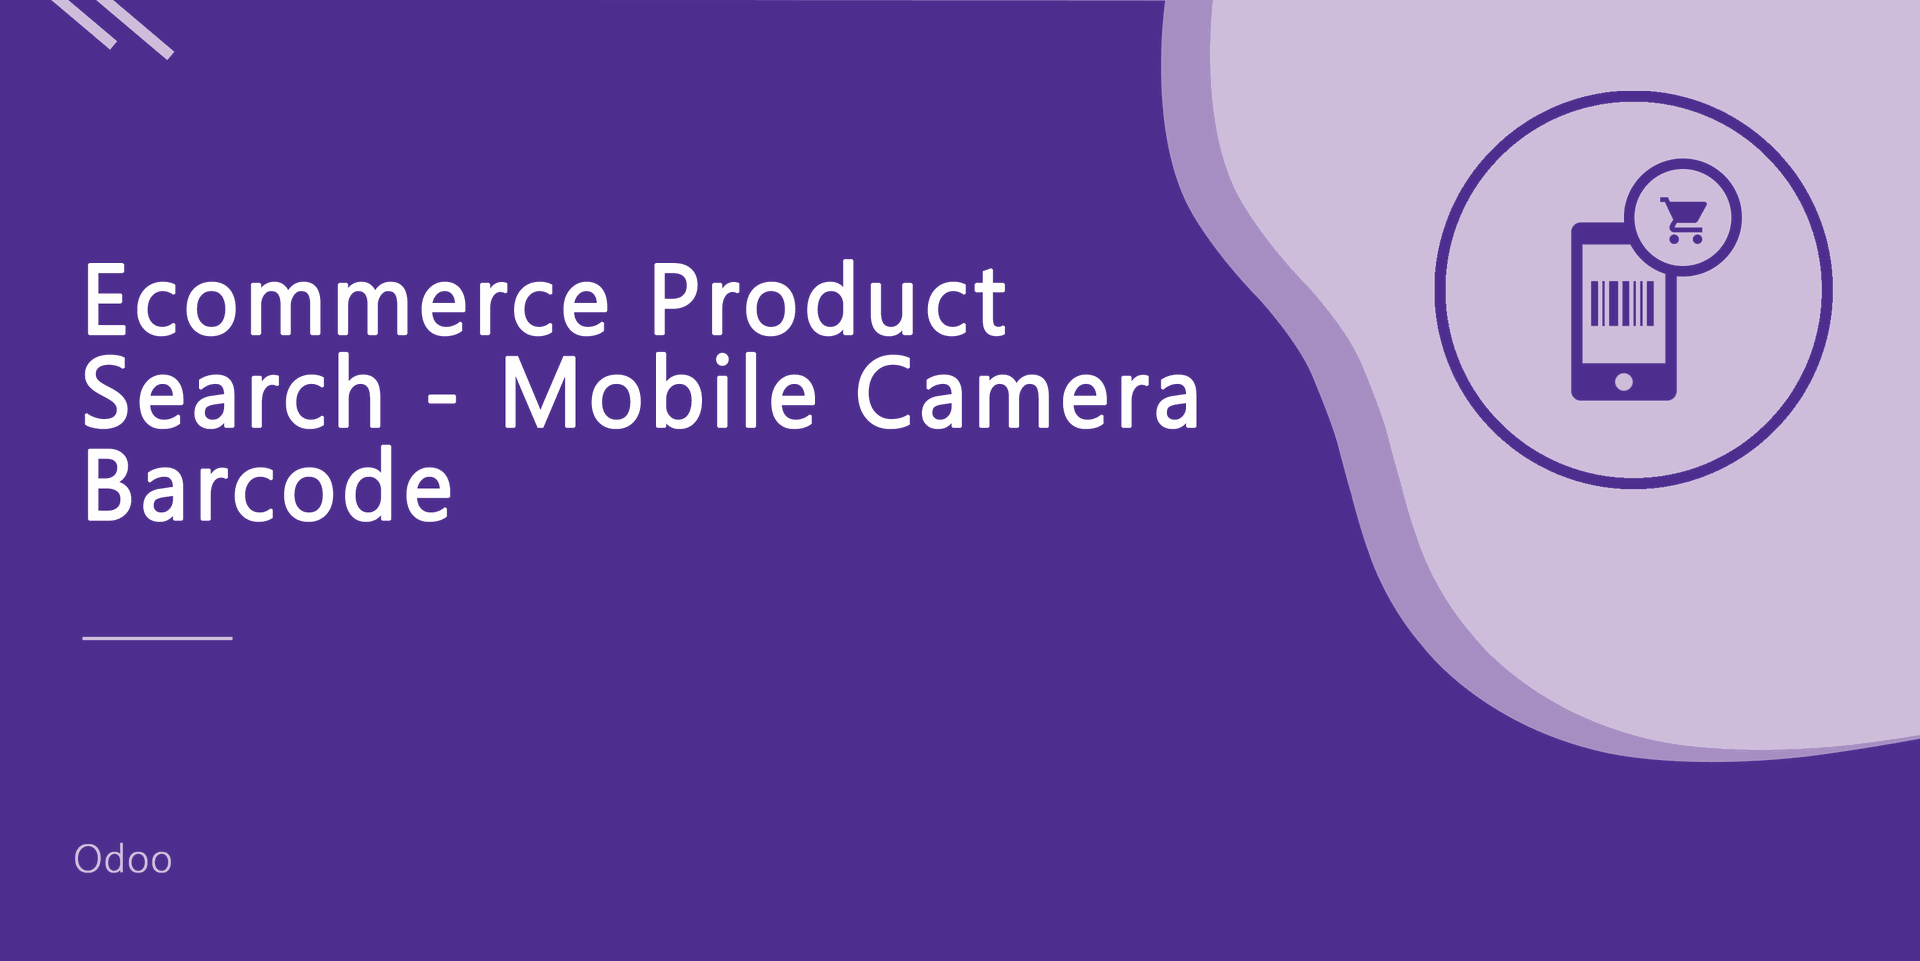 Ecommerce Product Search - Mobile Camera Barcode